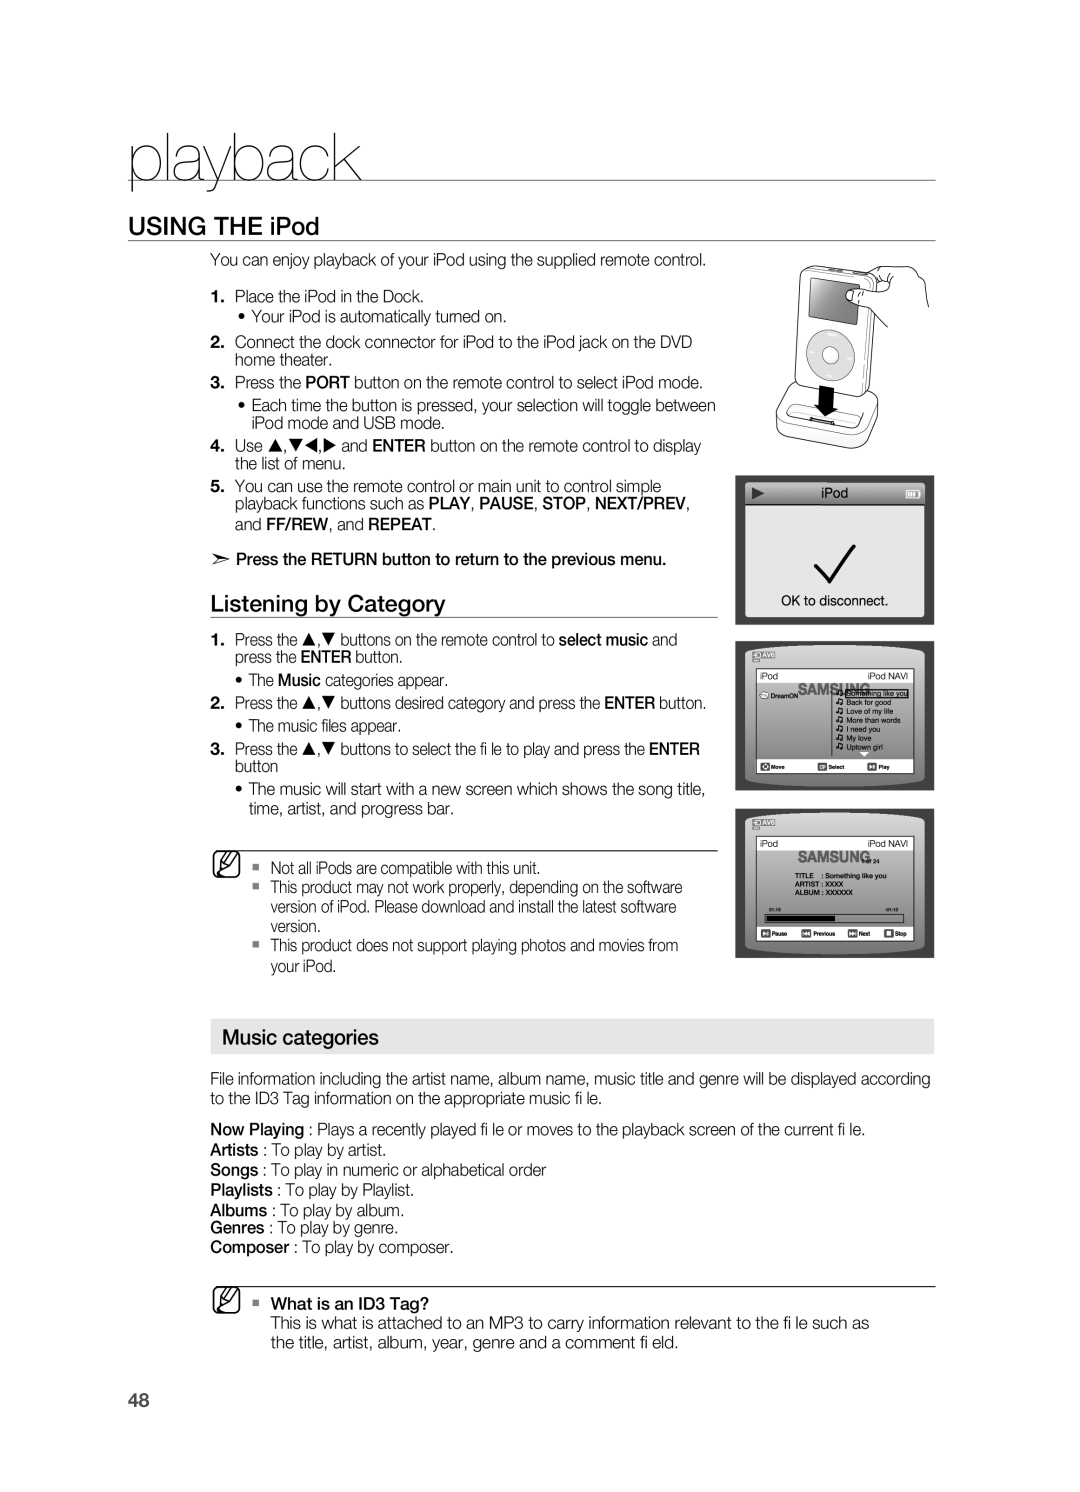 Samsung HT-TWZ415 user manual USINg THE iPod, playback, Listening by Category, Music categories 